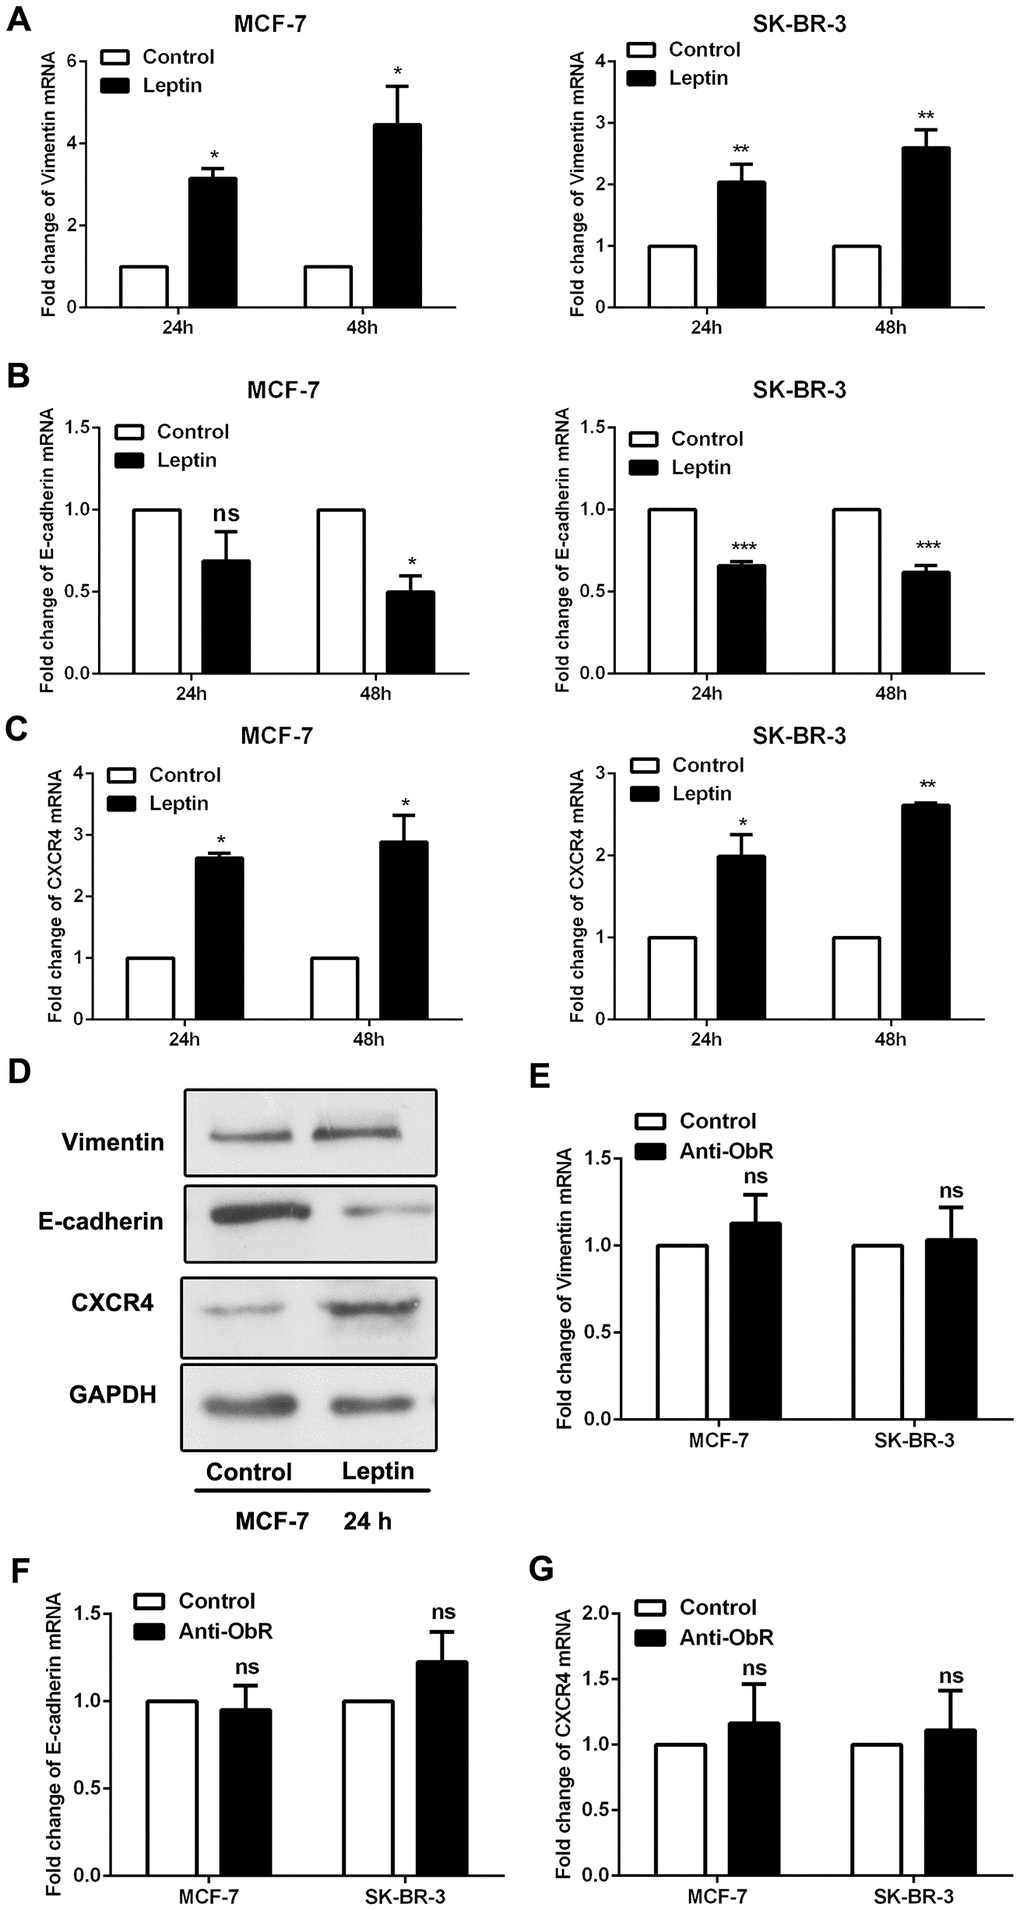 Leptin receptor mediated, leptin-induced EMT in breast cancer cells. (A–C) Real-time PCR was performed to examine Vimentin, E-cadherin, and CXCR4 expression in MCF-7 and SK-BR-3 cells. Data are shown as the means ± SD. *PPPD) Western blot was employed to detect Vimentin, E-cadherin, and CXCR4 expression in MCF-7 cells. (E–G) Real-time PCR was used to detect Vimentin, E-cadherin, and CXCR4 expression in MCF-7 and SK-BR-3 cells. Data are shown as means ± SD. ns, not significant.